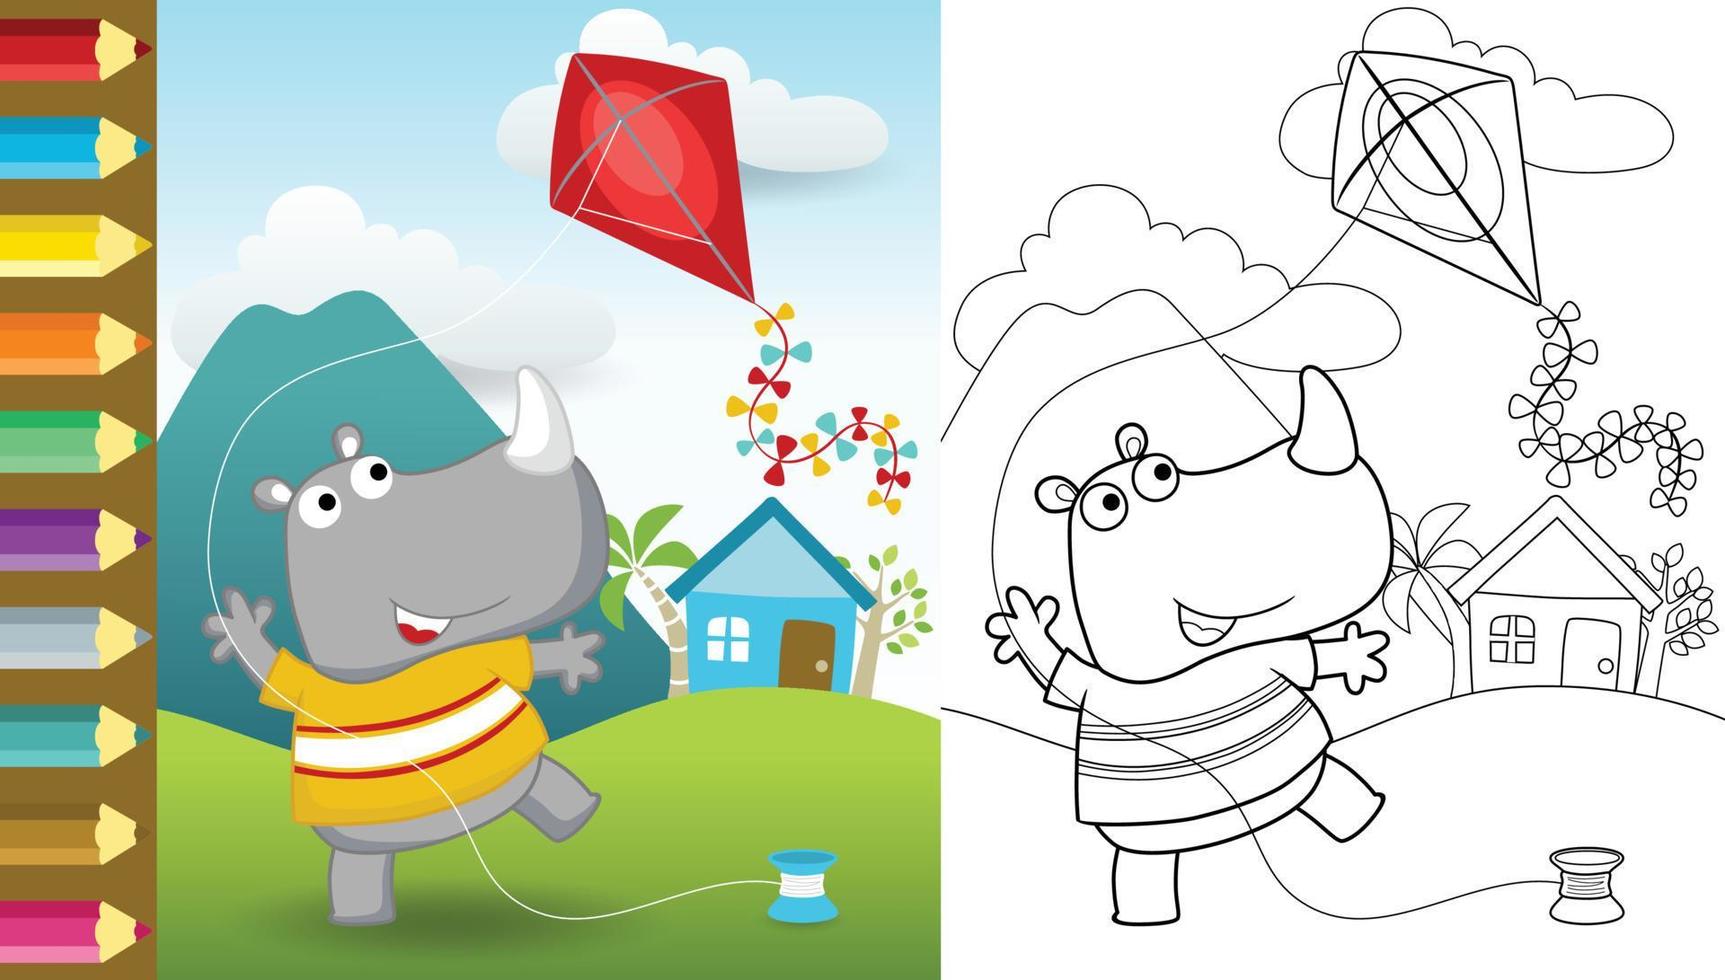 Cartoon of funny rhino playing kite on rural scenery background, coloring book or page vector